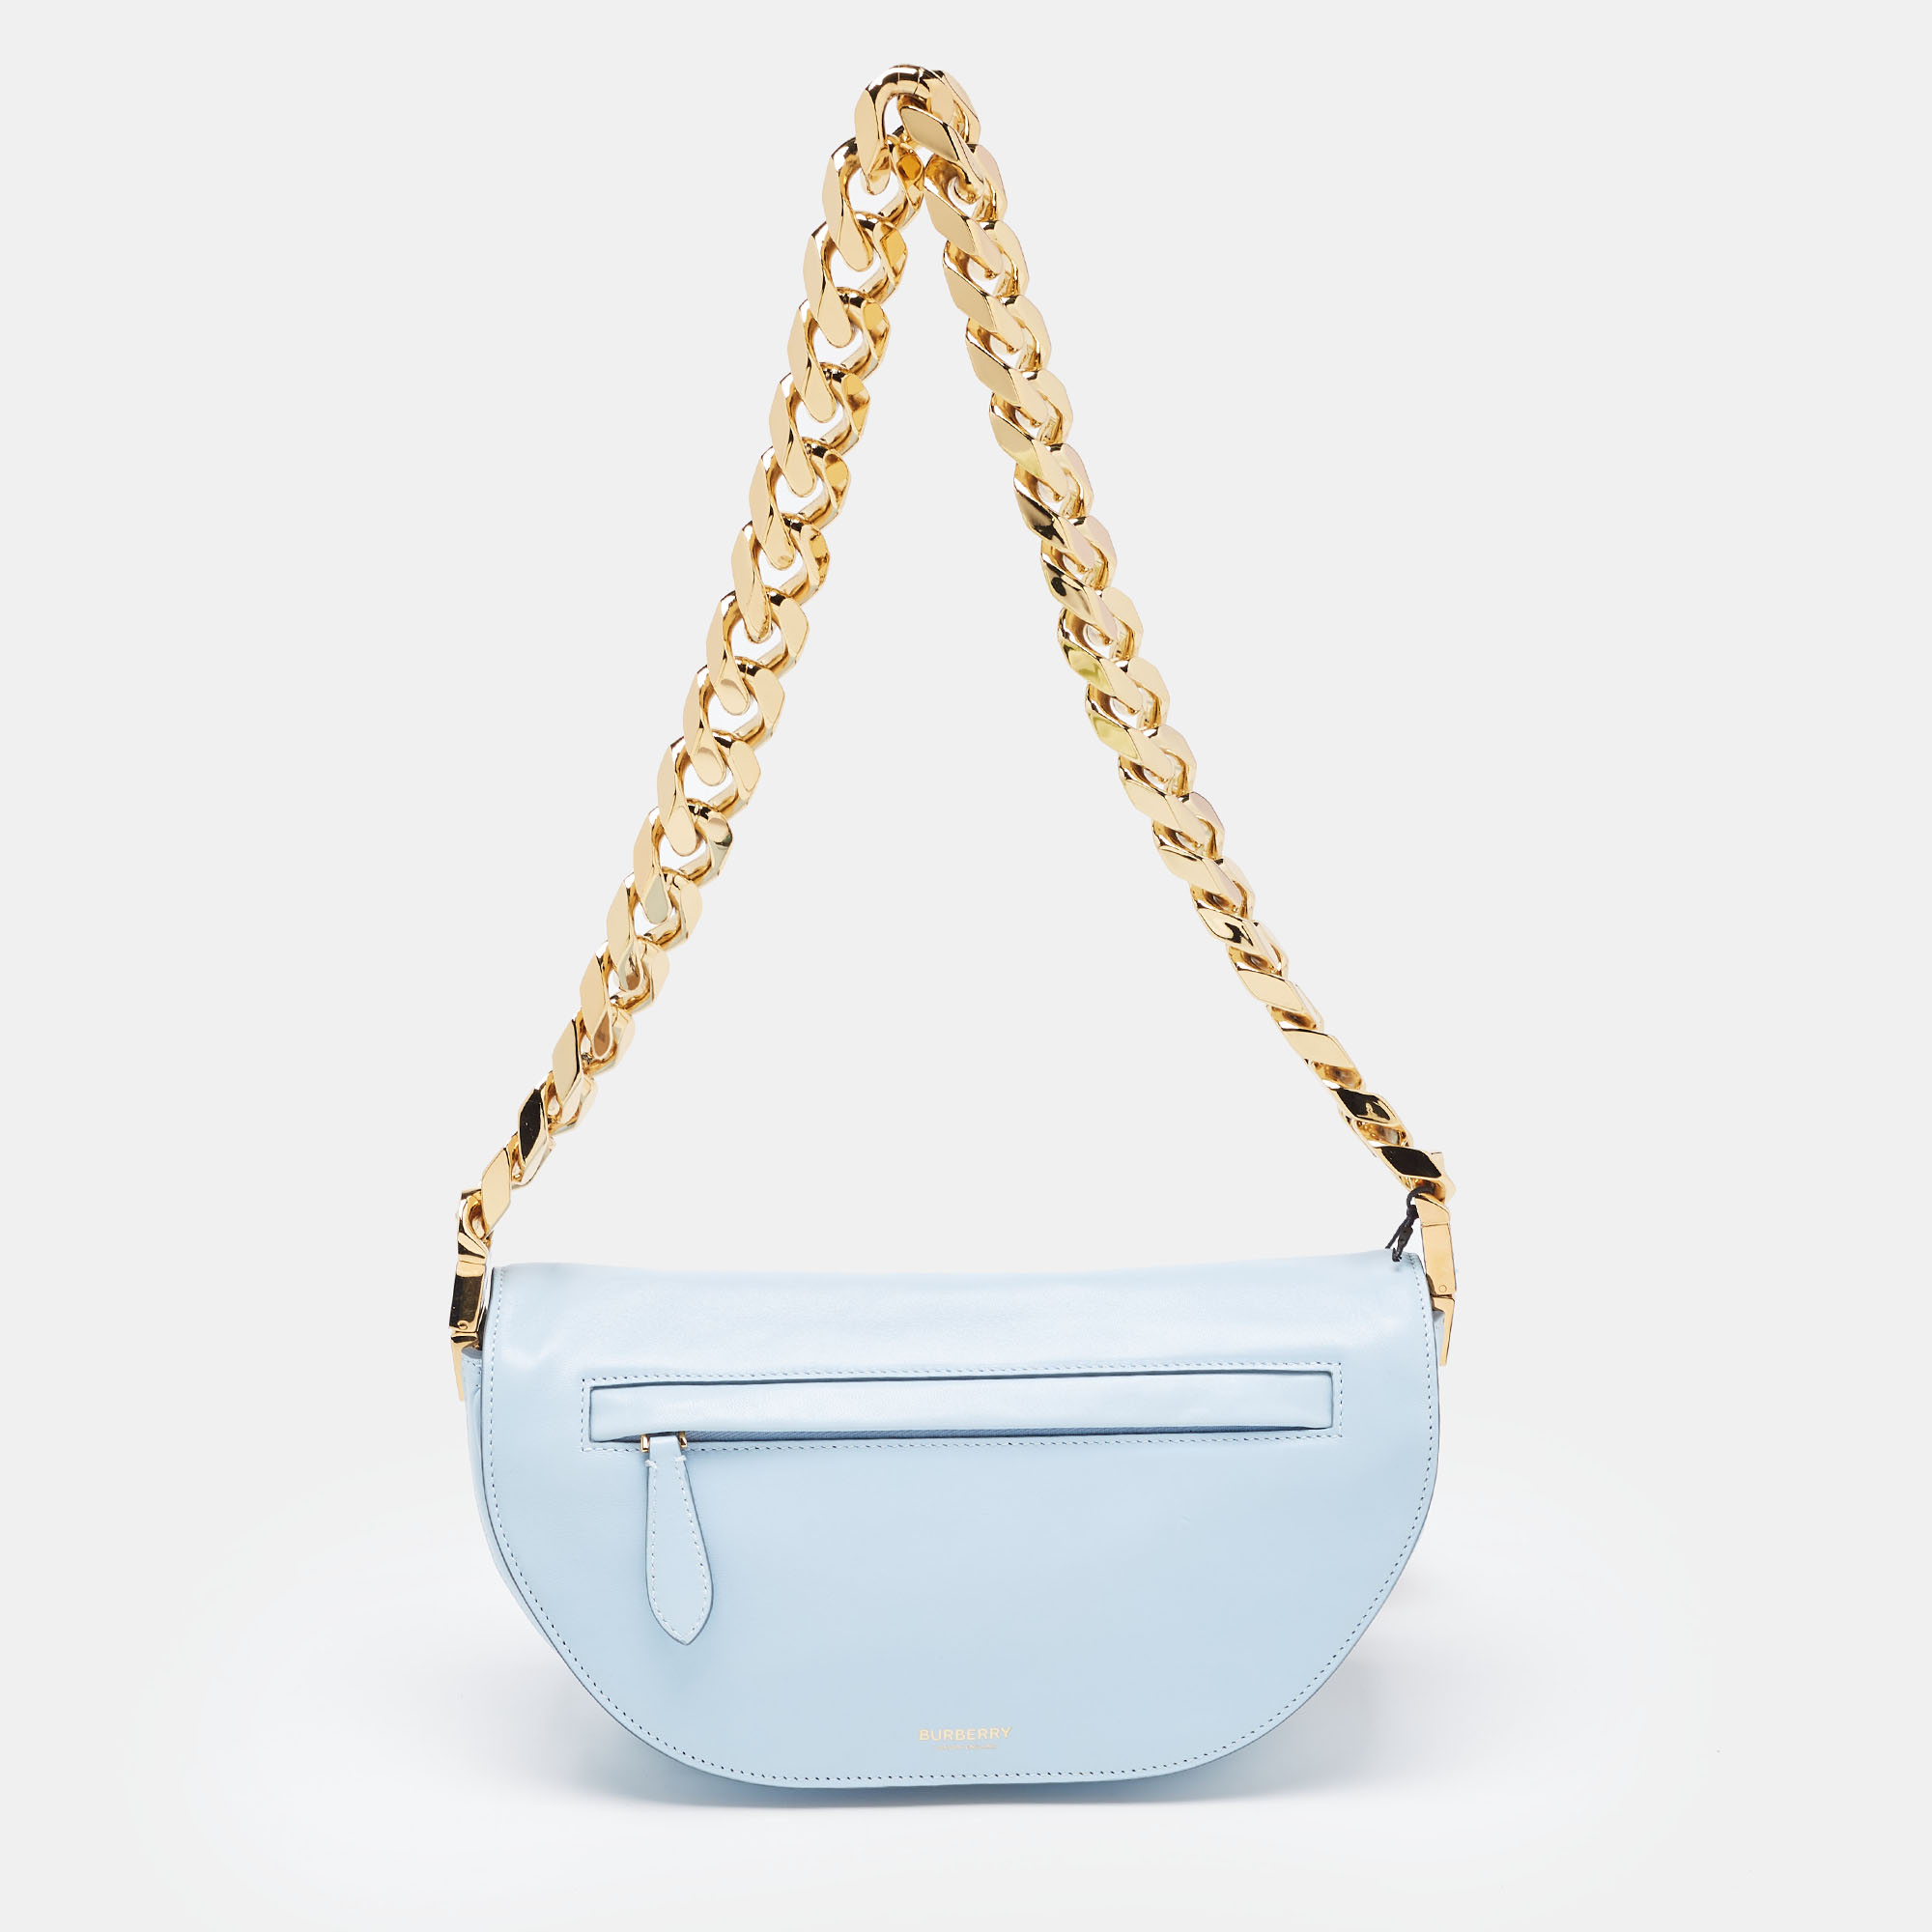 Indulge in luxury with this Burberry pale blue bag. Meticulously crafted from premium materials it combines exquisite design impeccable craftsmanship and timeless elegance. Elevate your style with this fashion accessory.